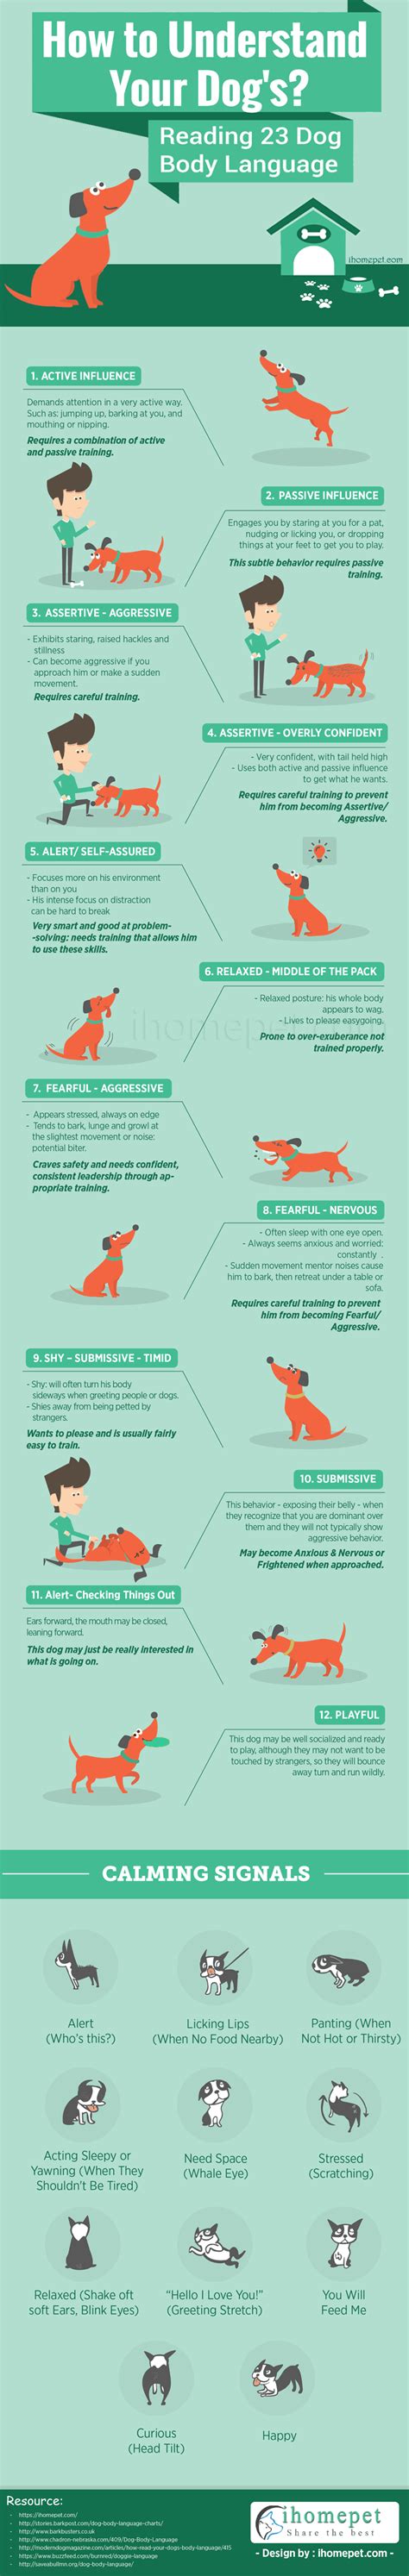 Understand Your Dog – Read 23 Dog Body Language Cues [Infographic] | Bit Rebels